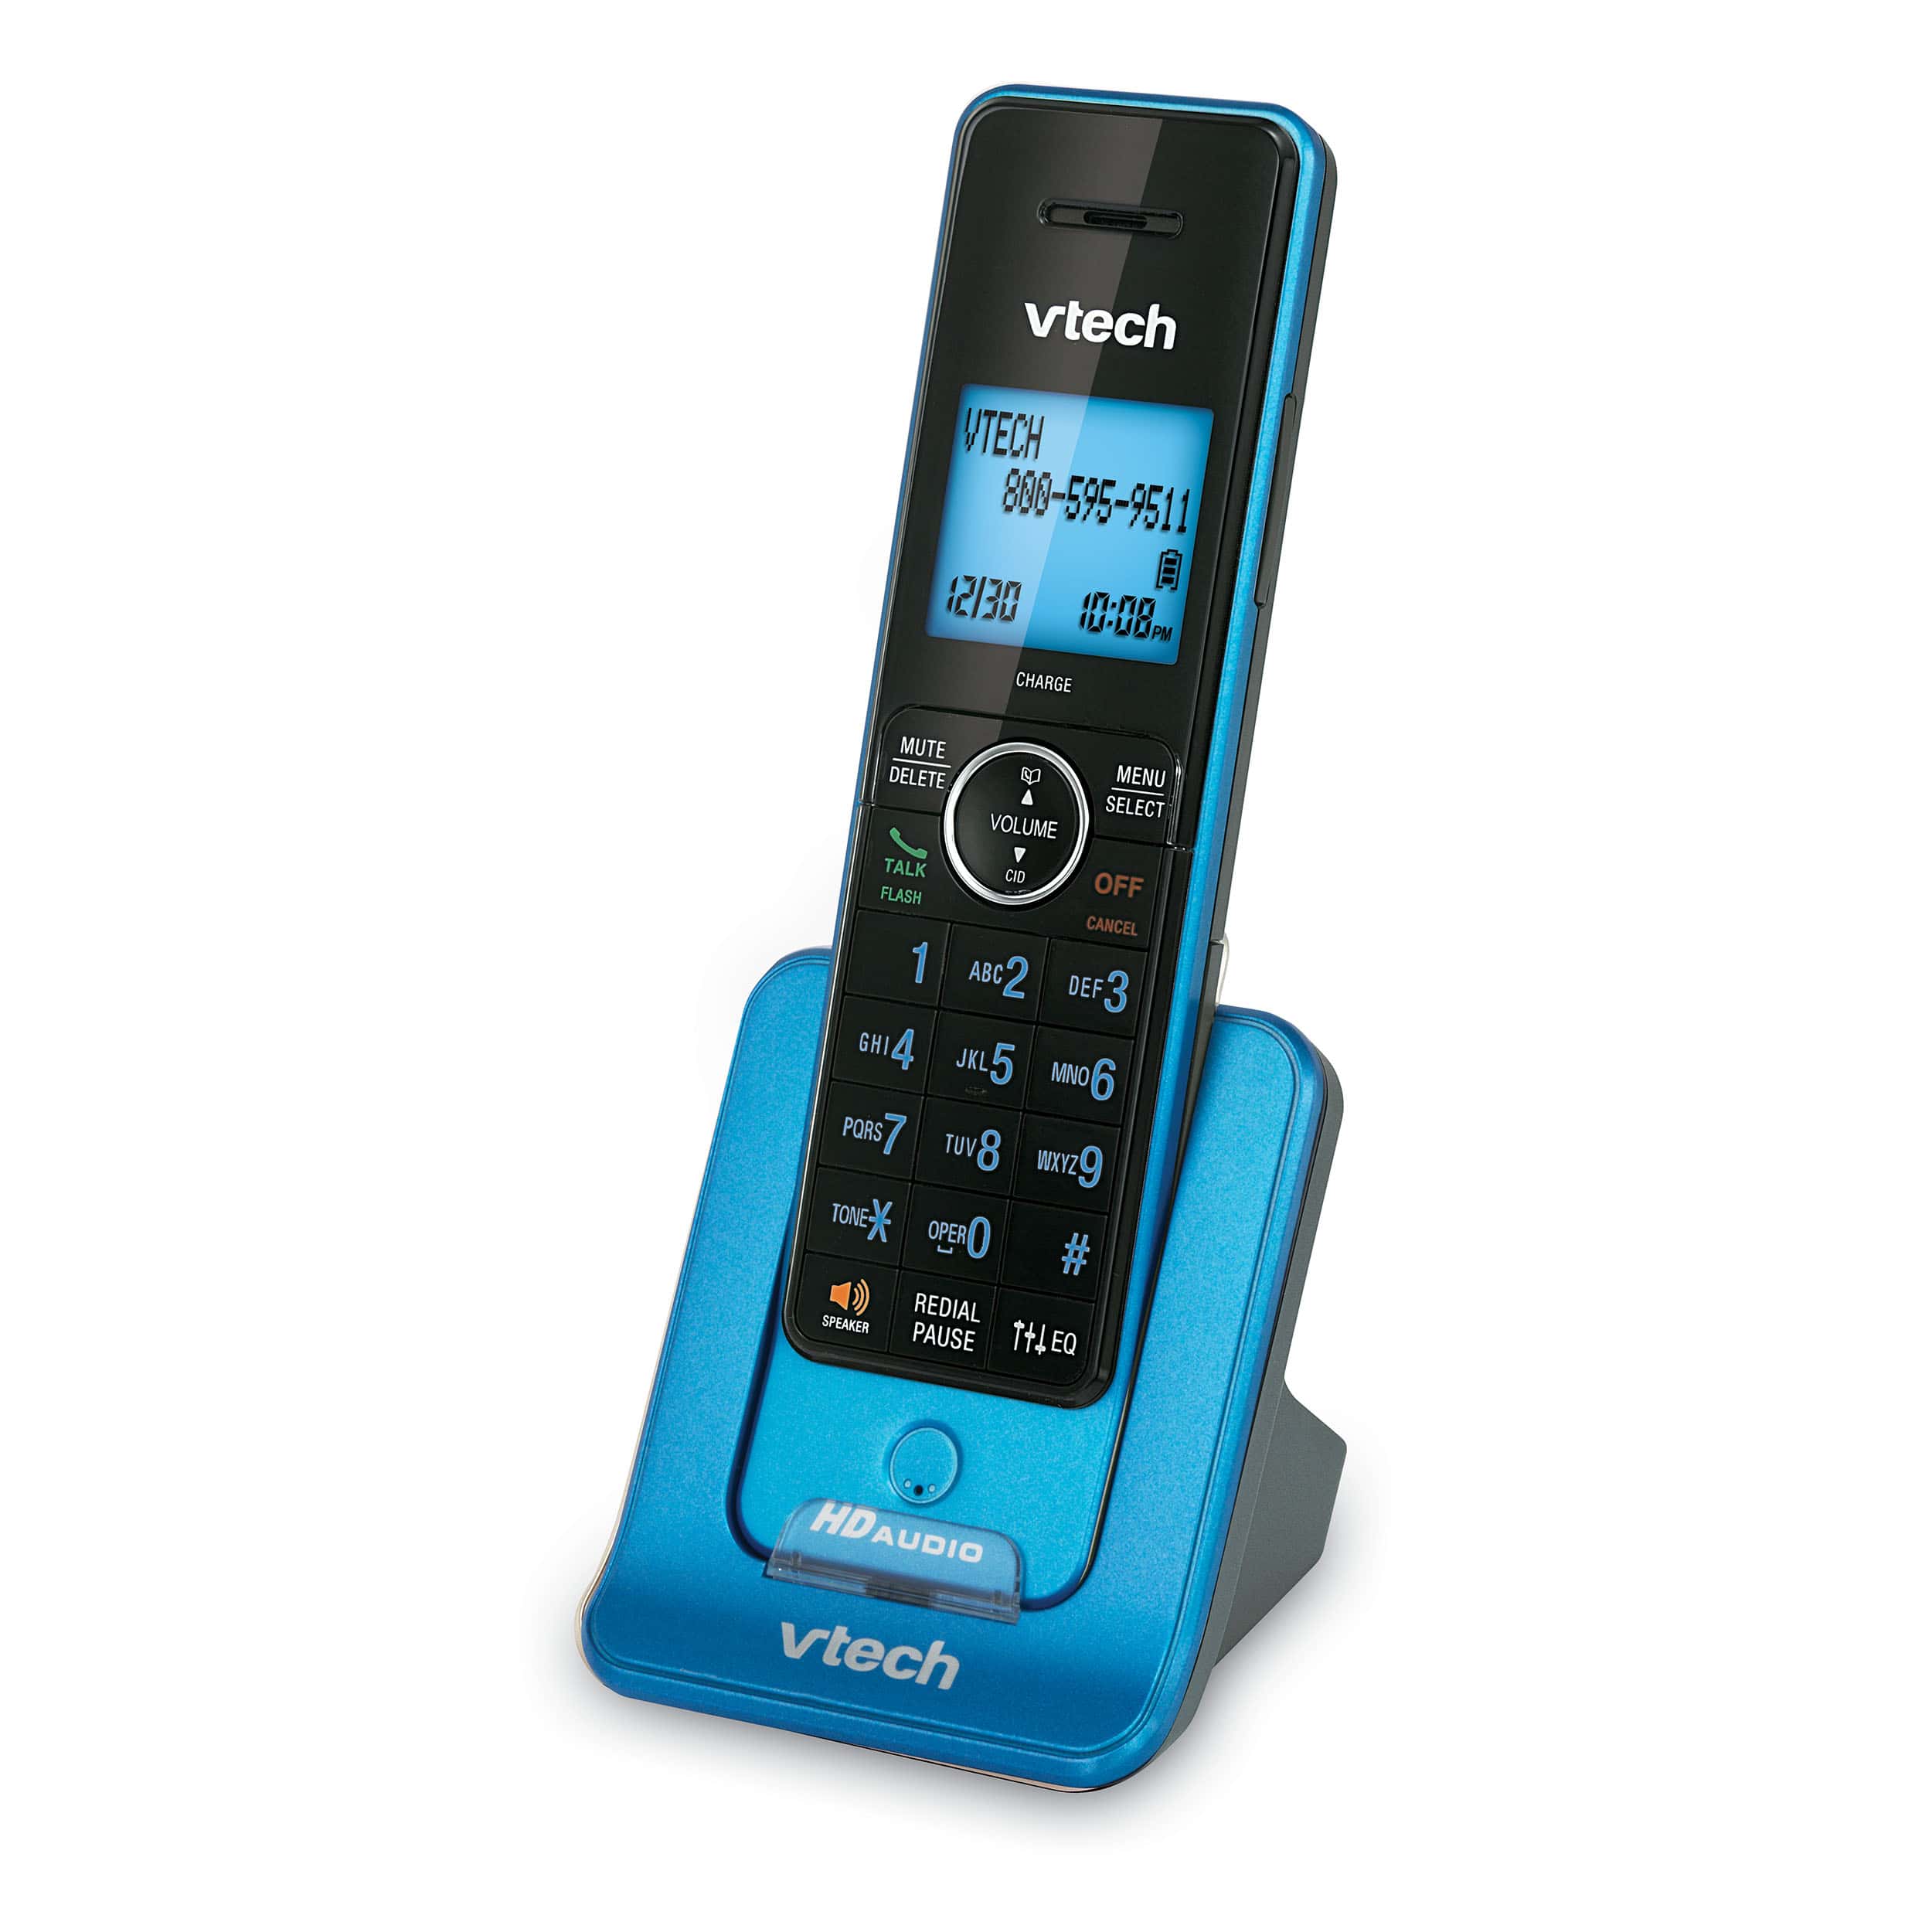 3 Handset Phone System with Caller ID/Call Waiting - view 6